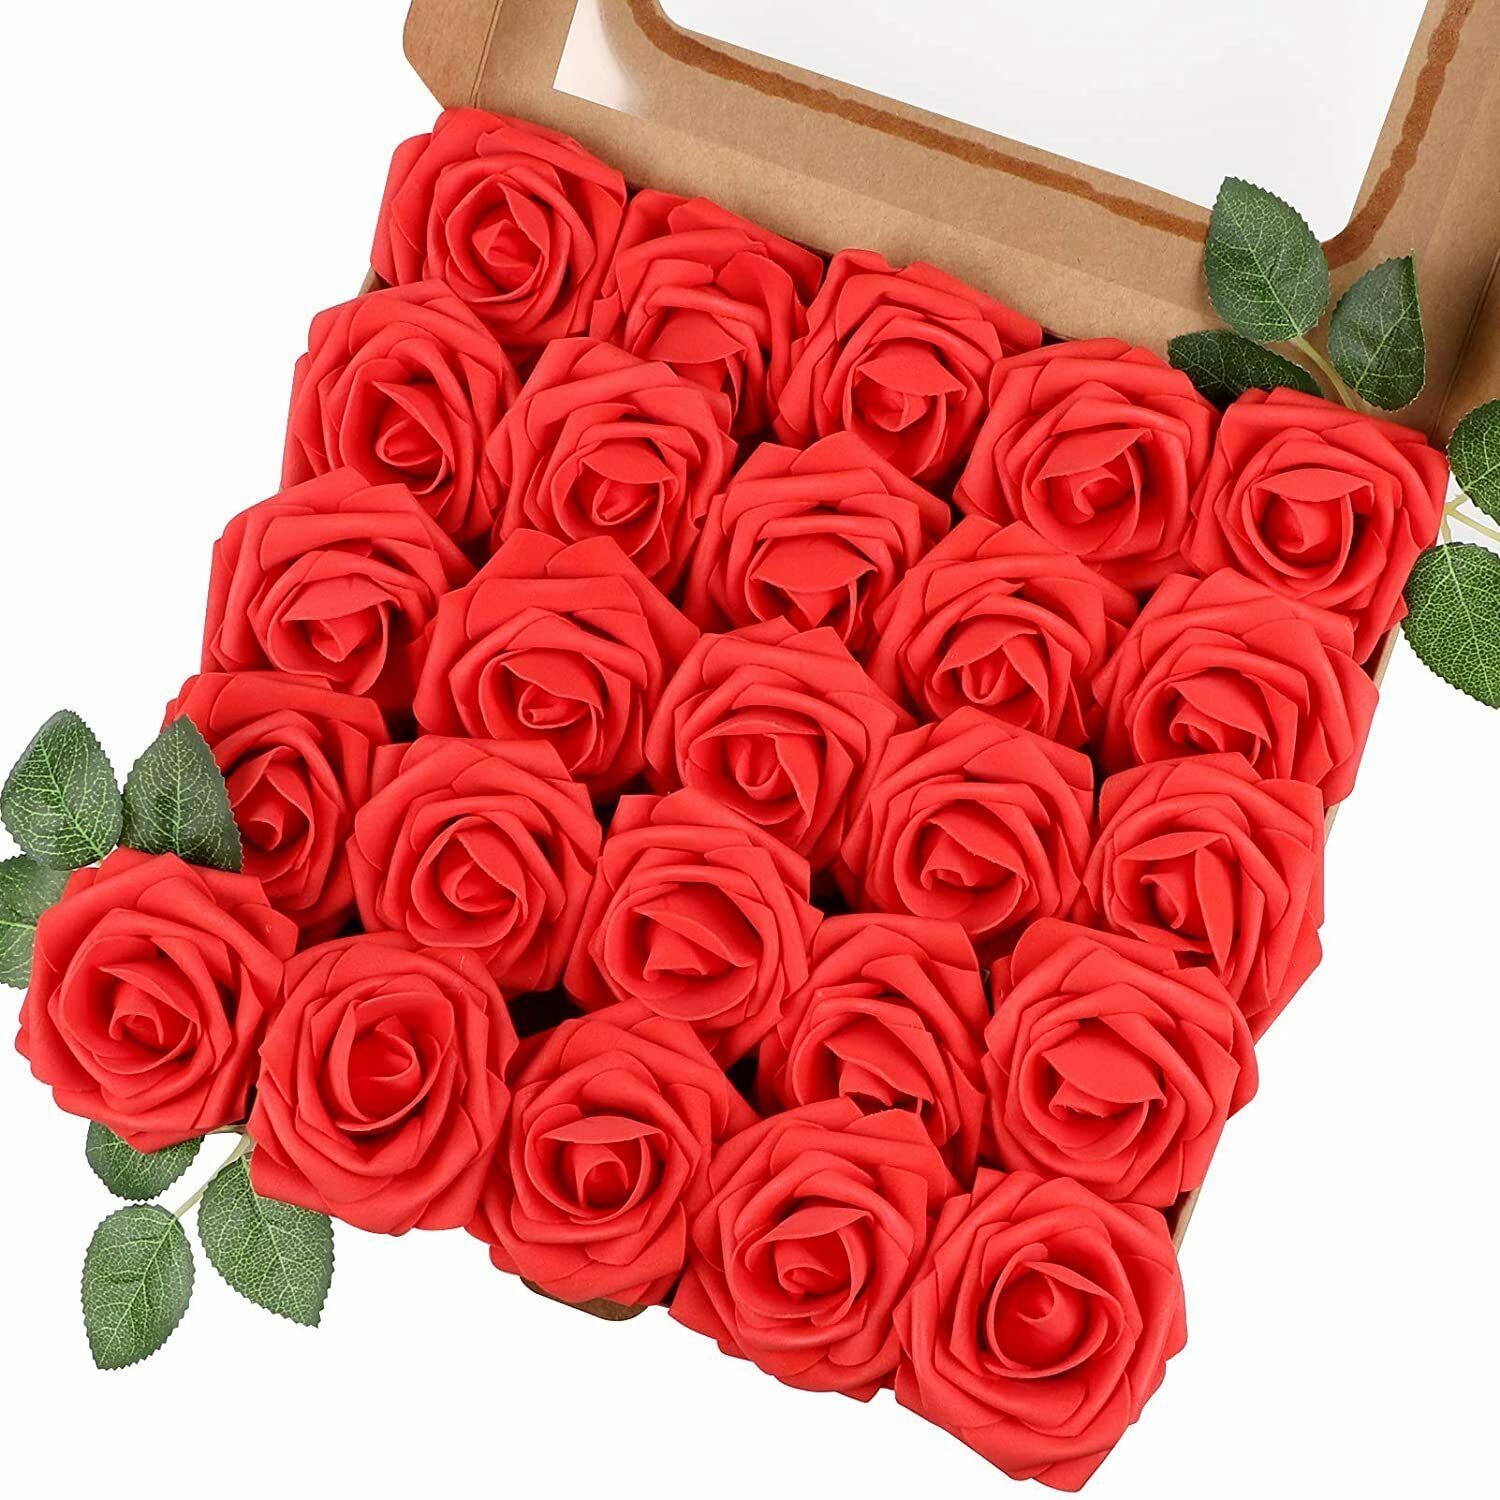 Artificial Flowers 25pcs Real Looking Fake Roses w/stem for DIY Wedding ...